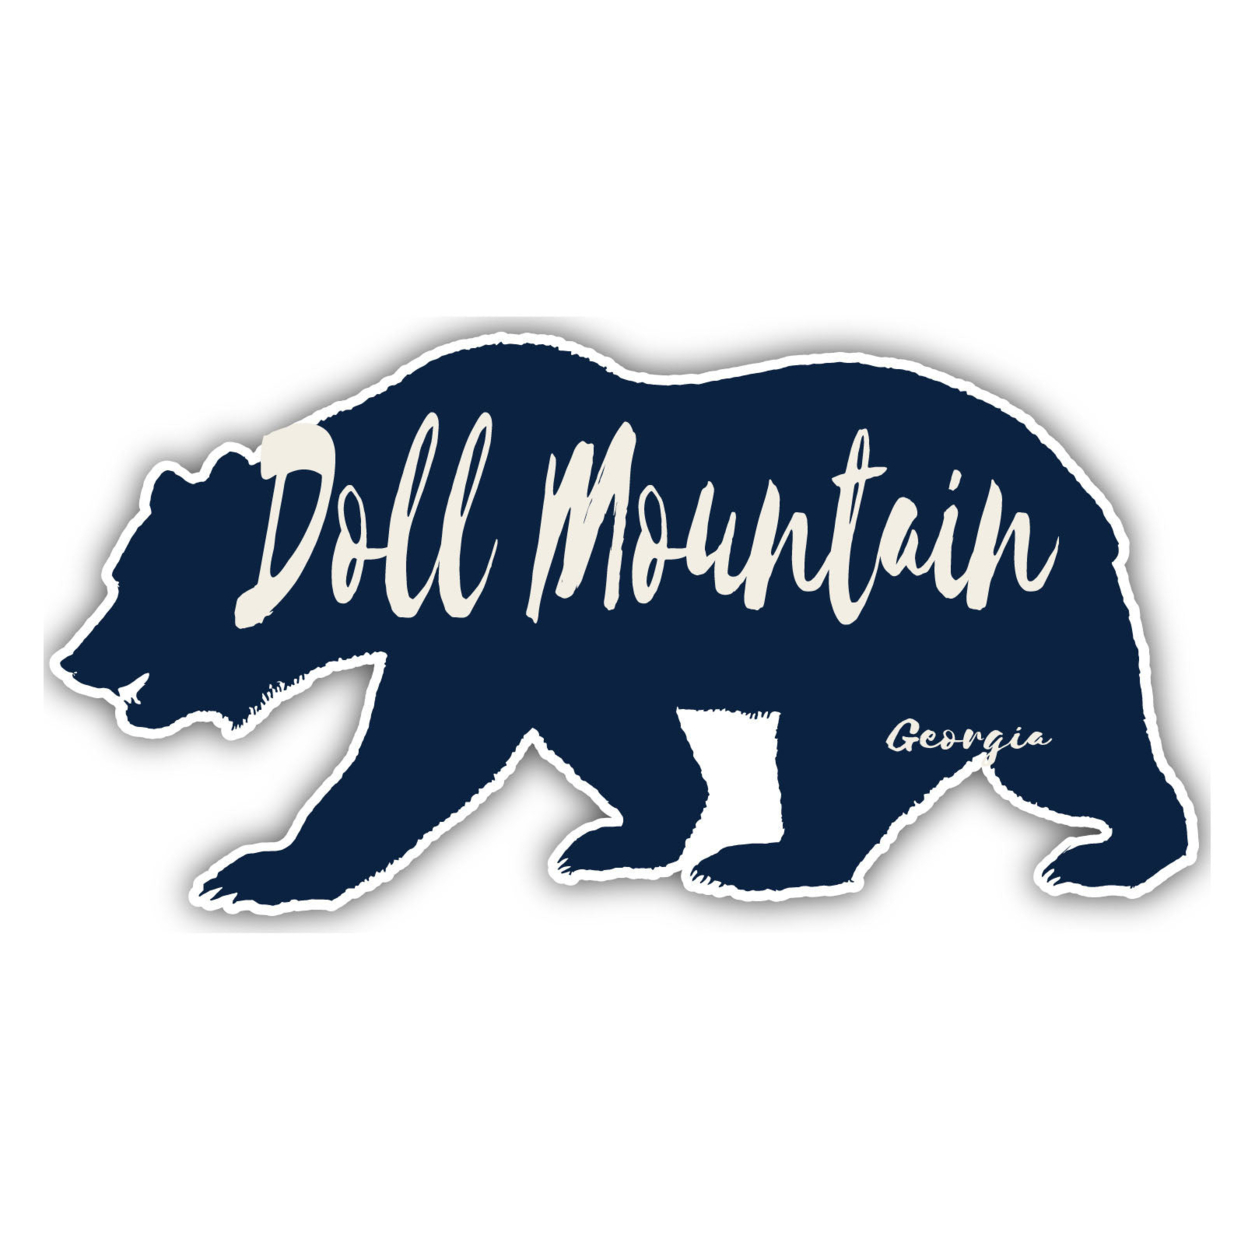 Doll Mountain Georgia Souvenir Decorative Stickers (Choose Theme And Size) - 4-Pack, 2-Inch, Bear